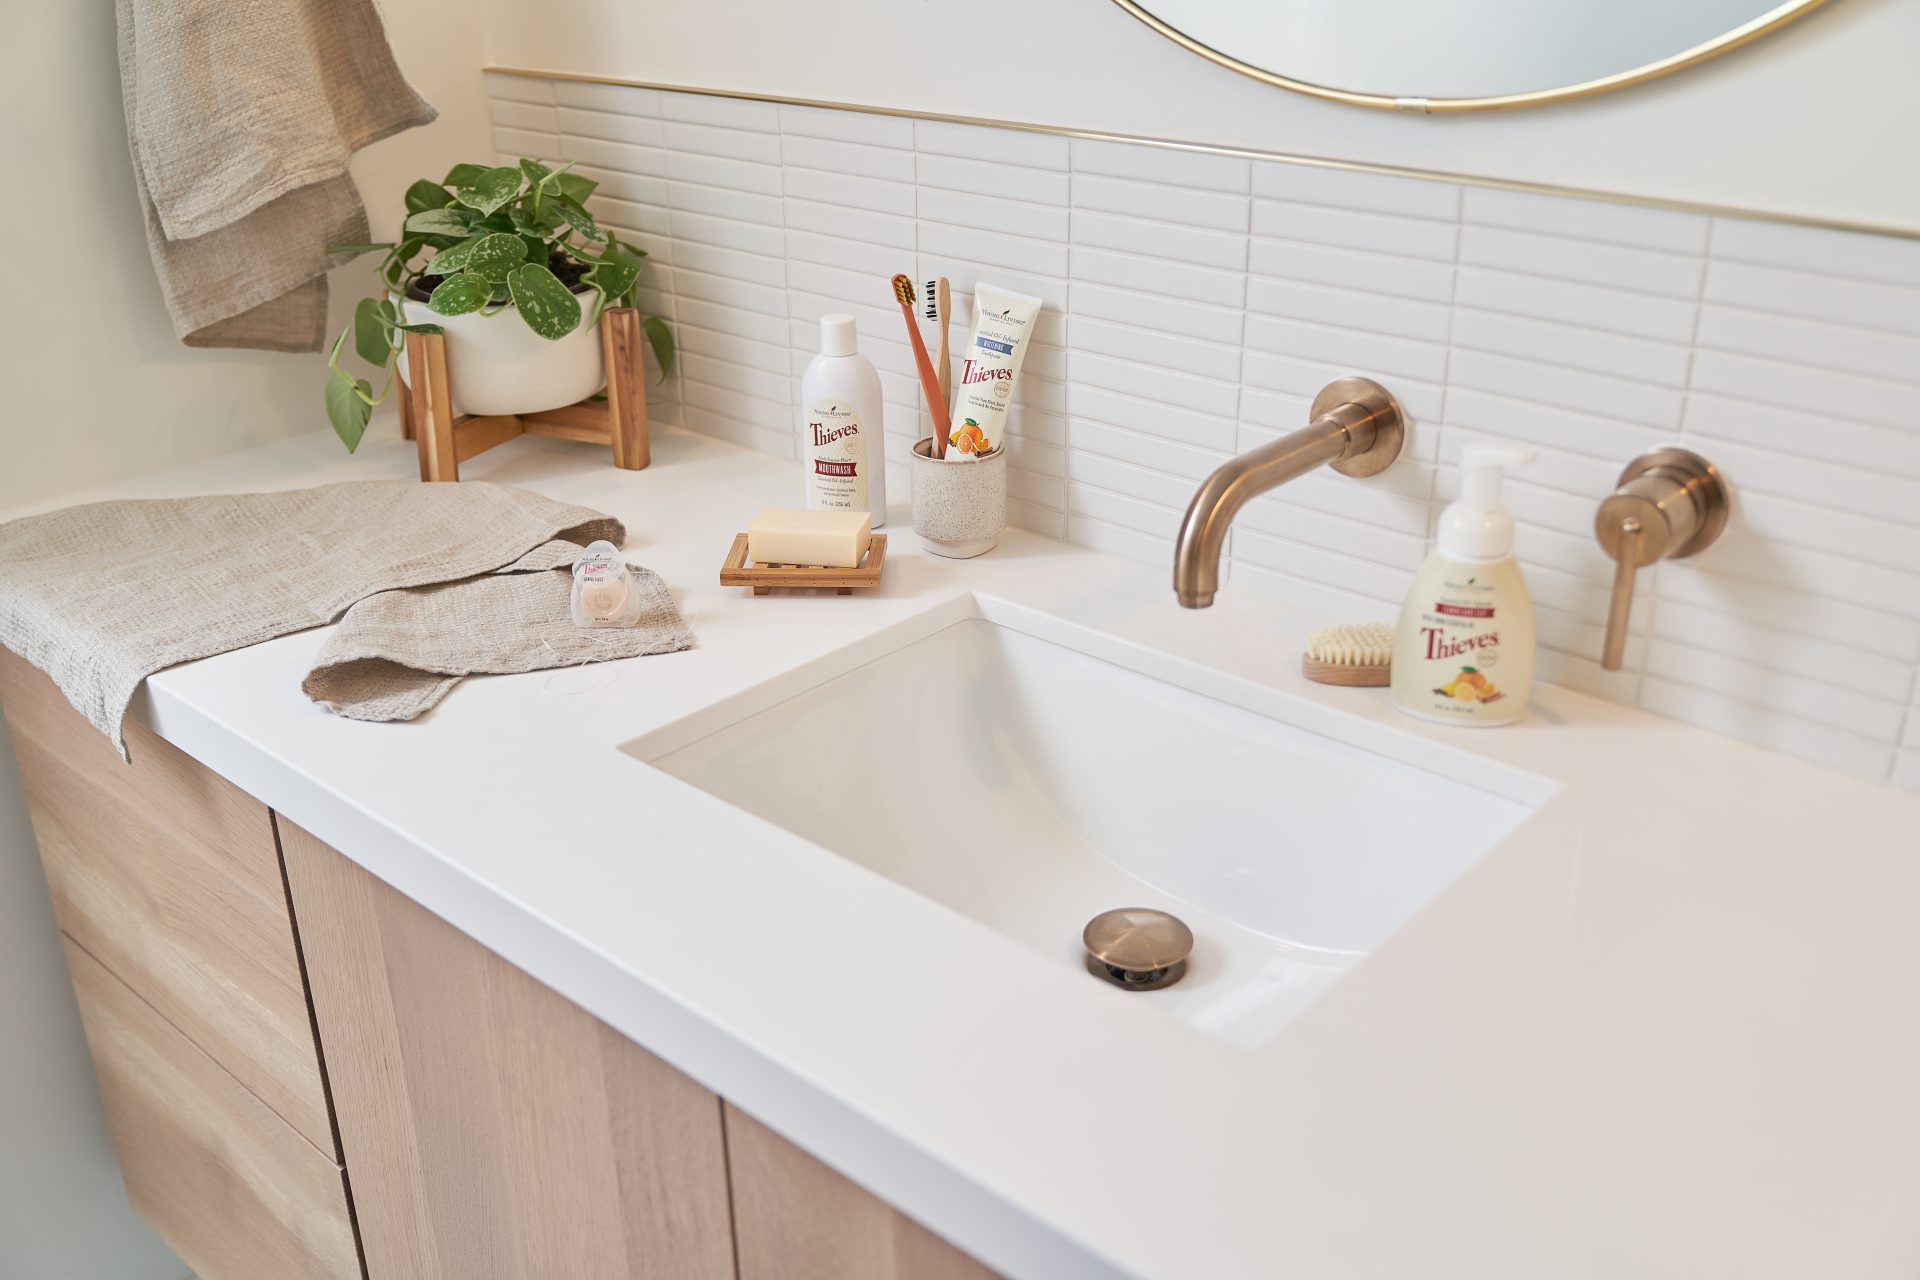 Clean bathroom with young living products